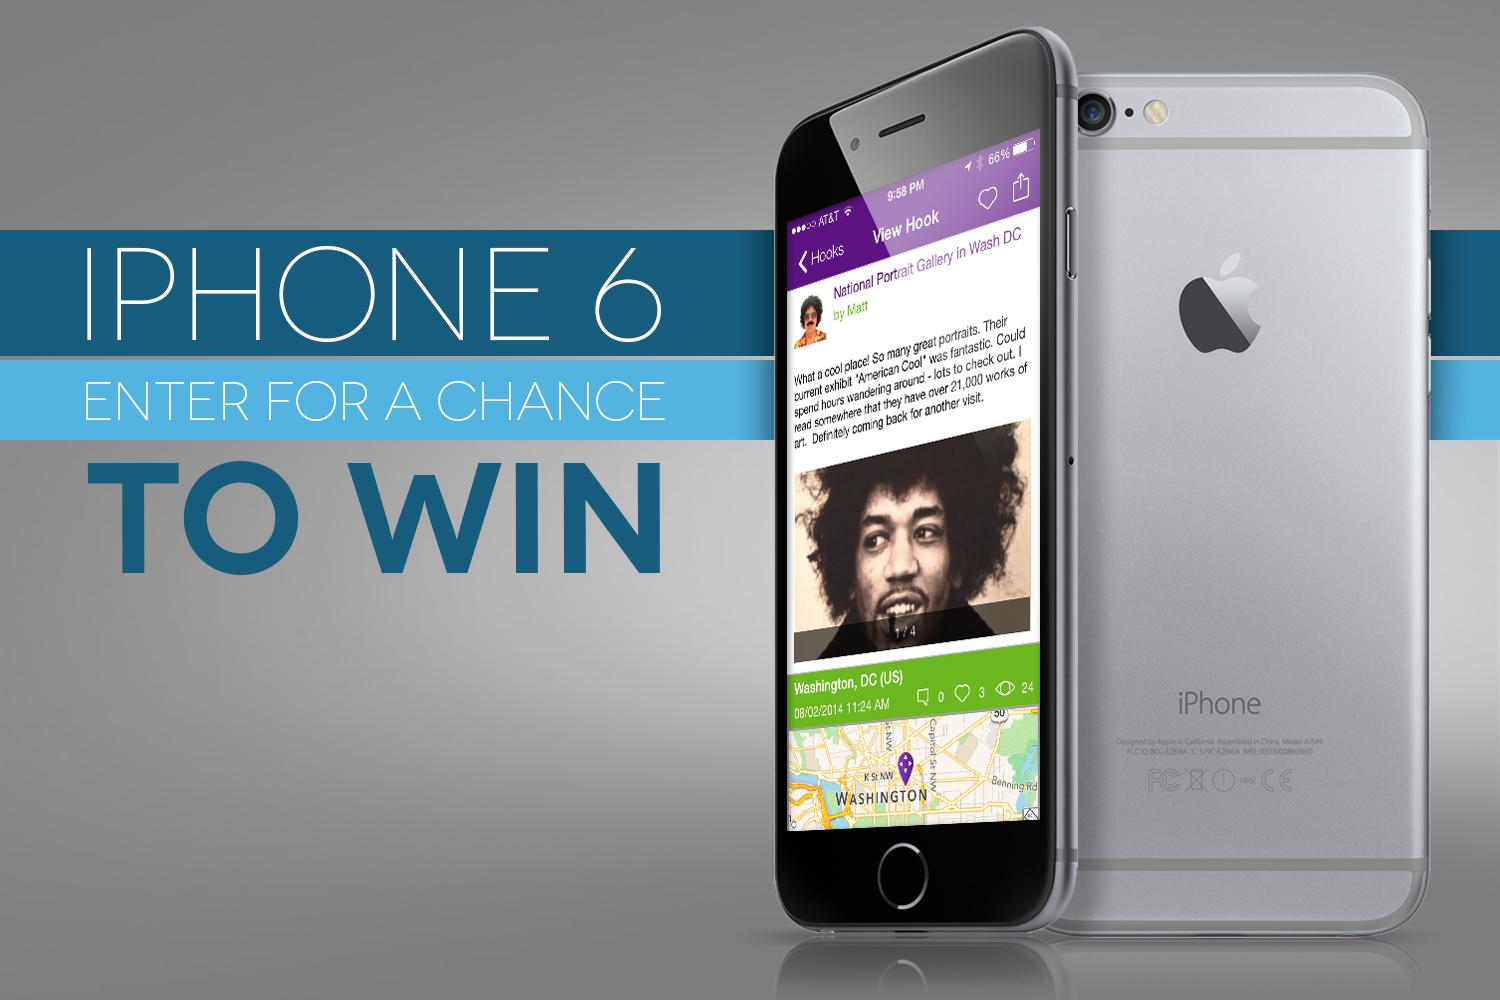 iphone 6 giveaway contest